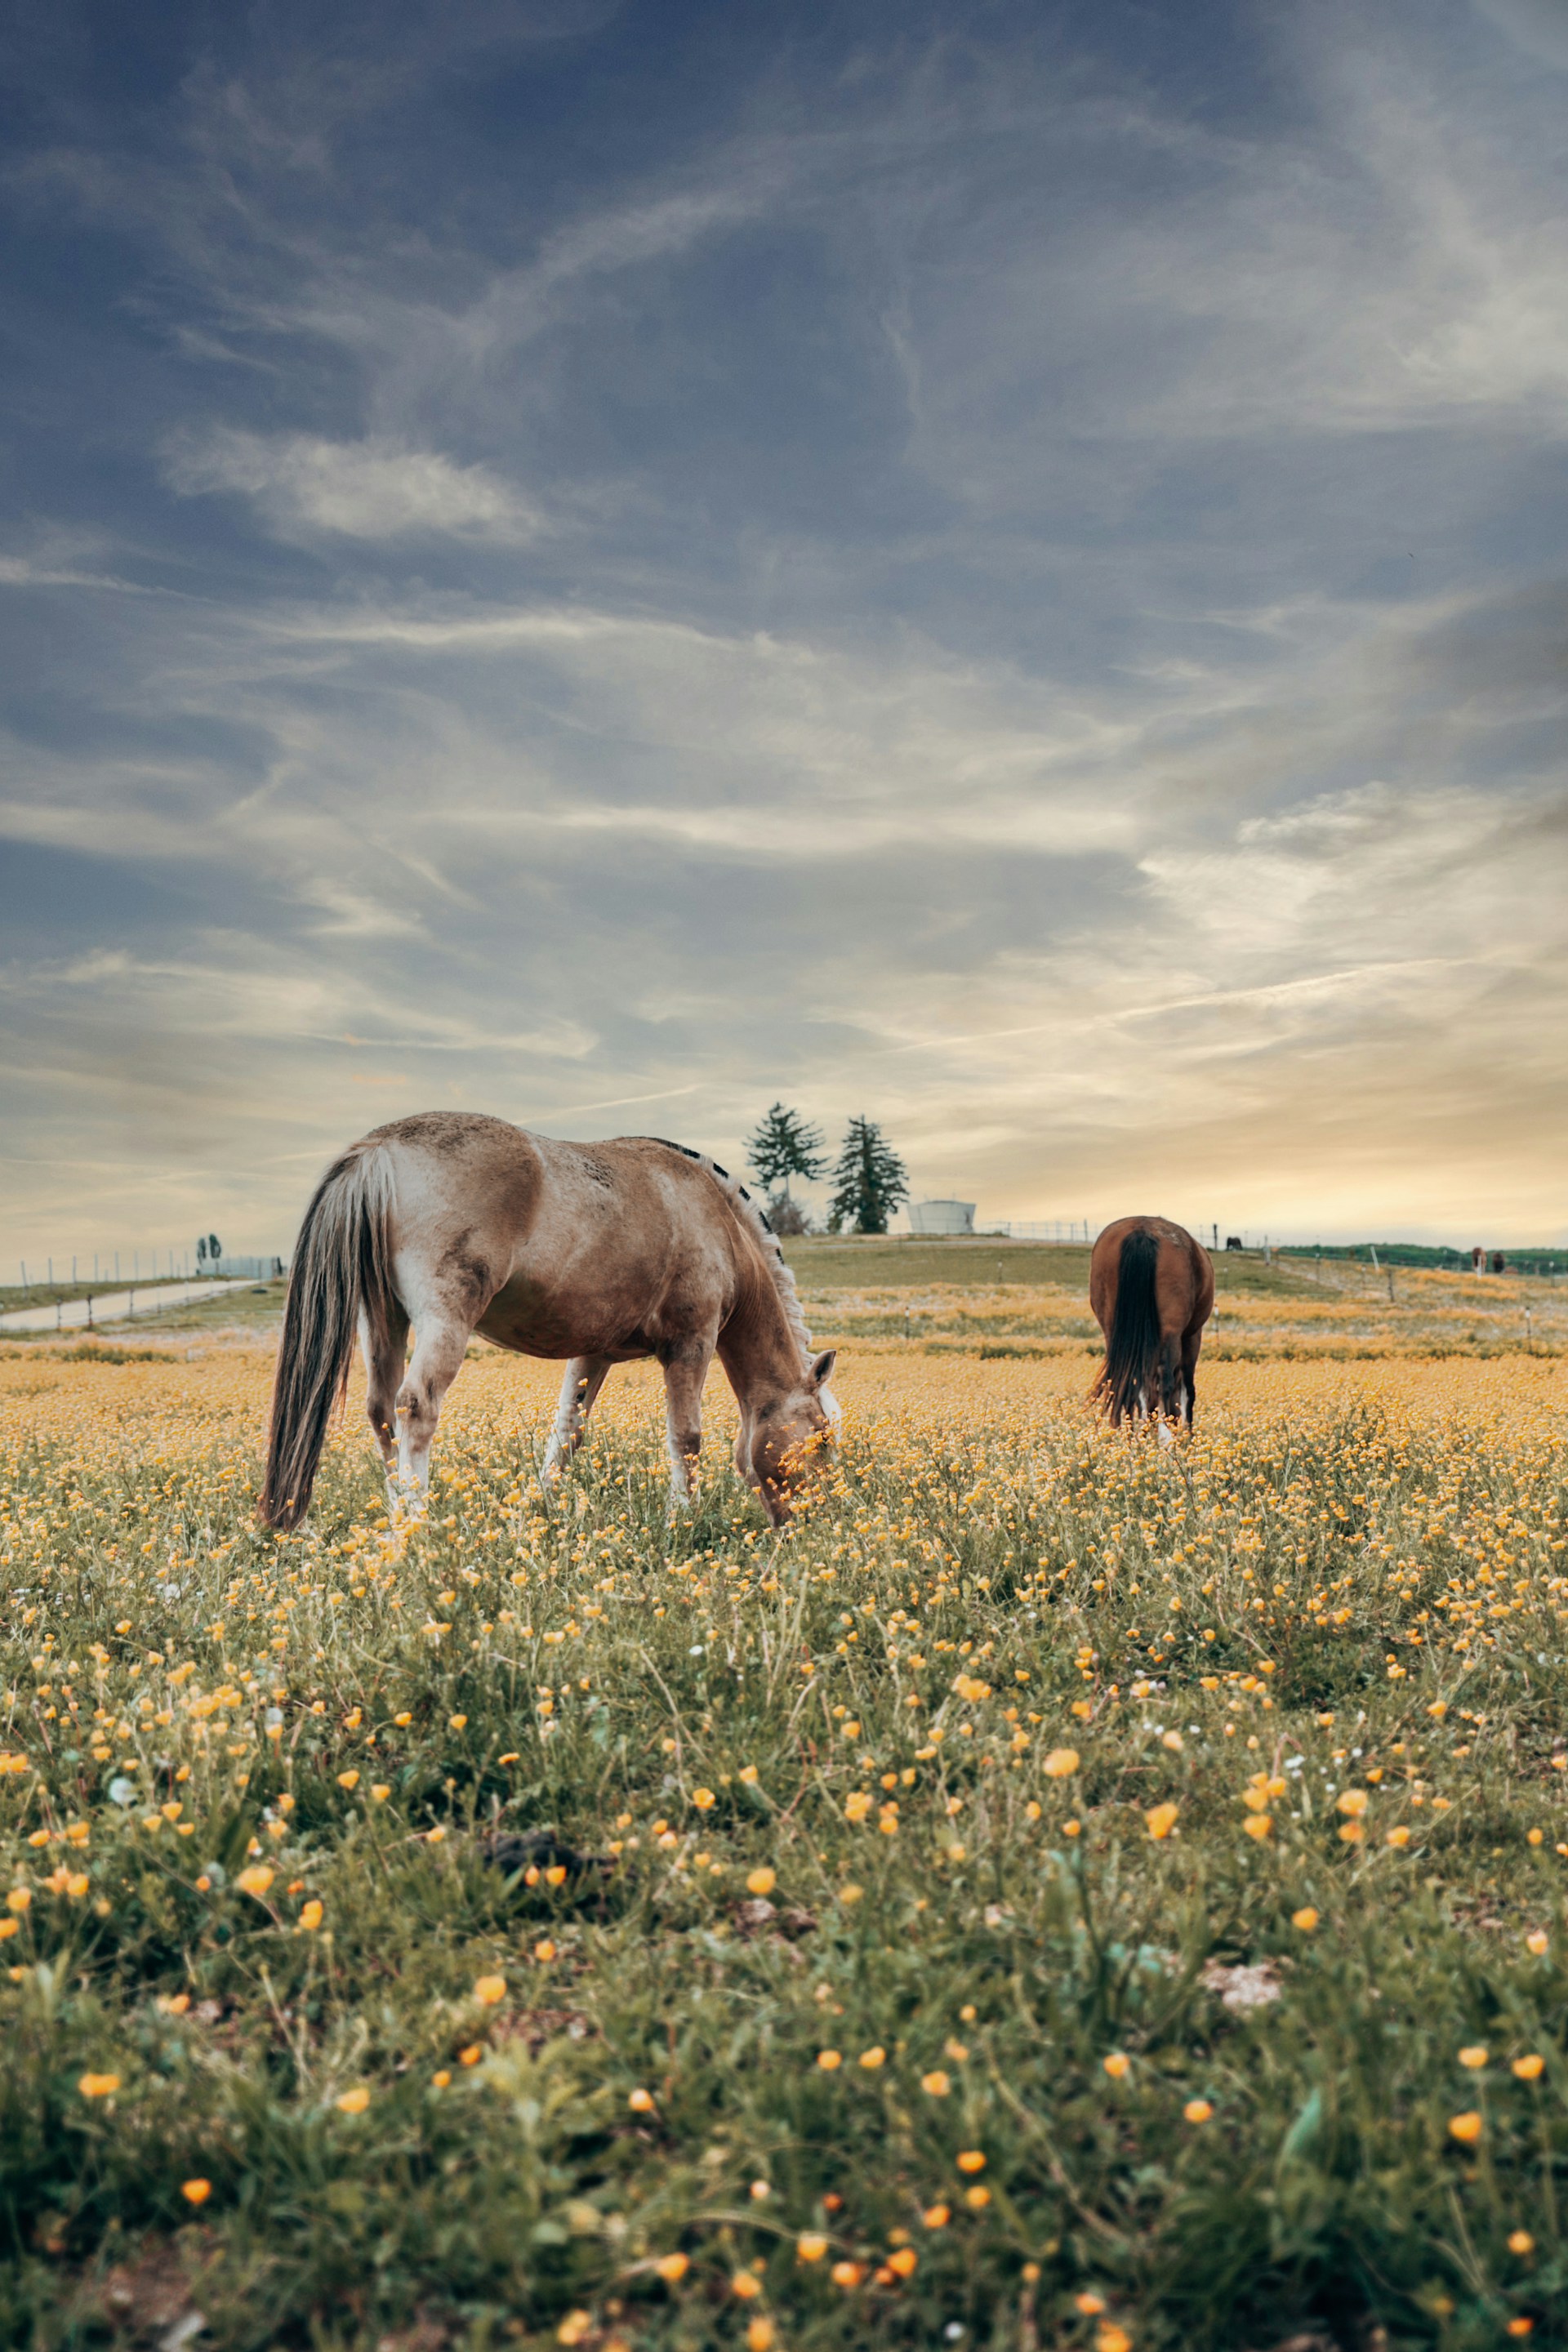 brown horse eating yellow flowers on green grass field under cloudy sky during daytime